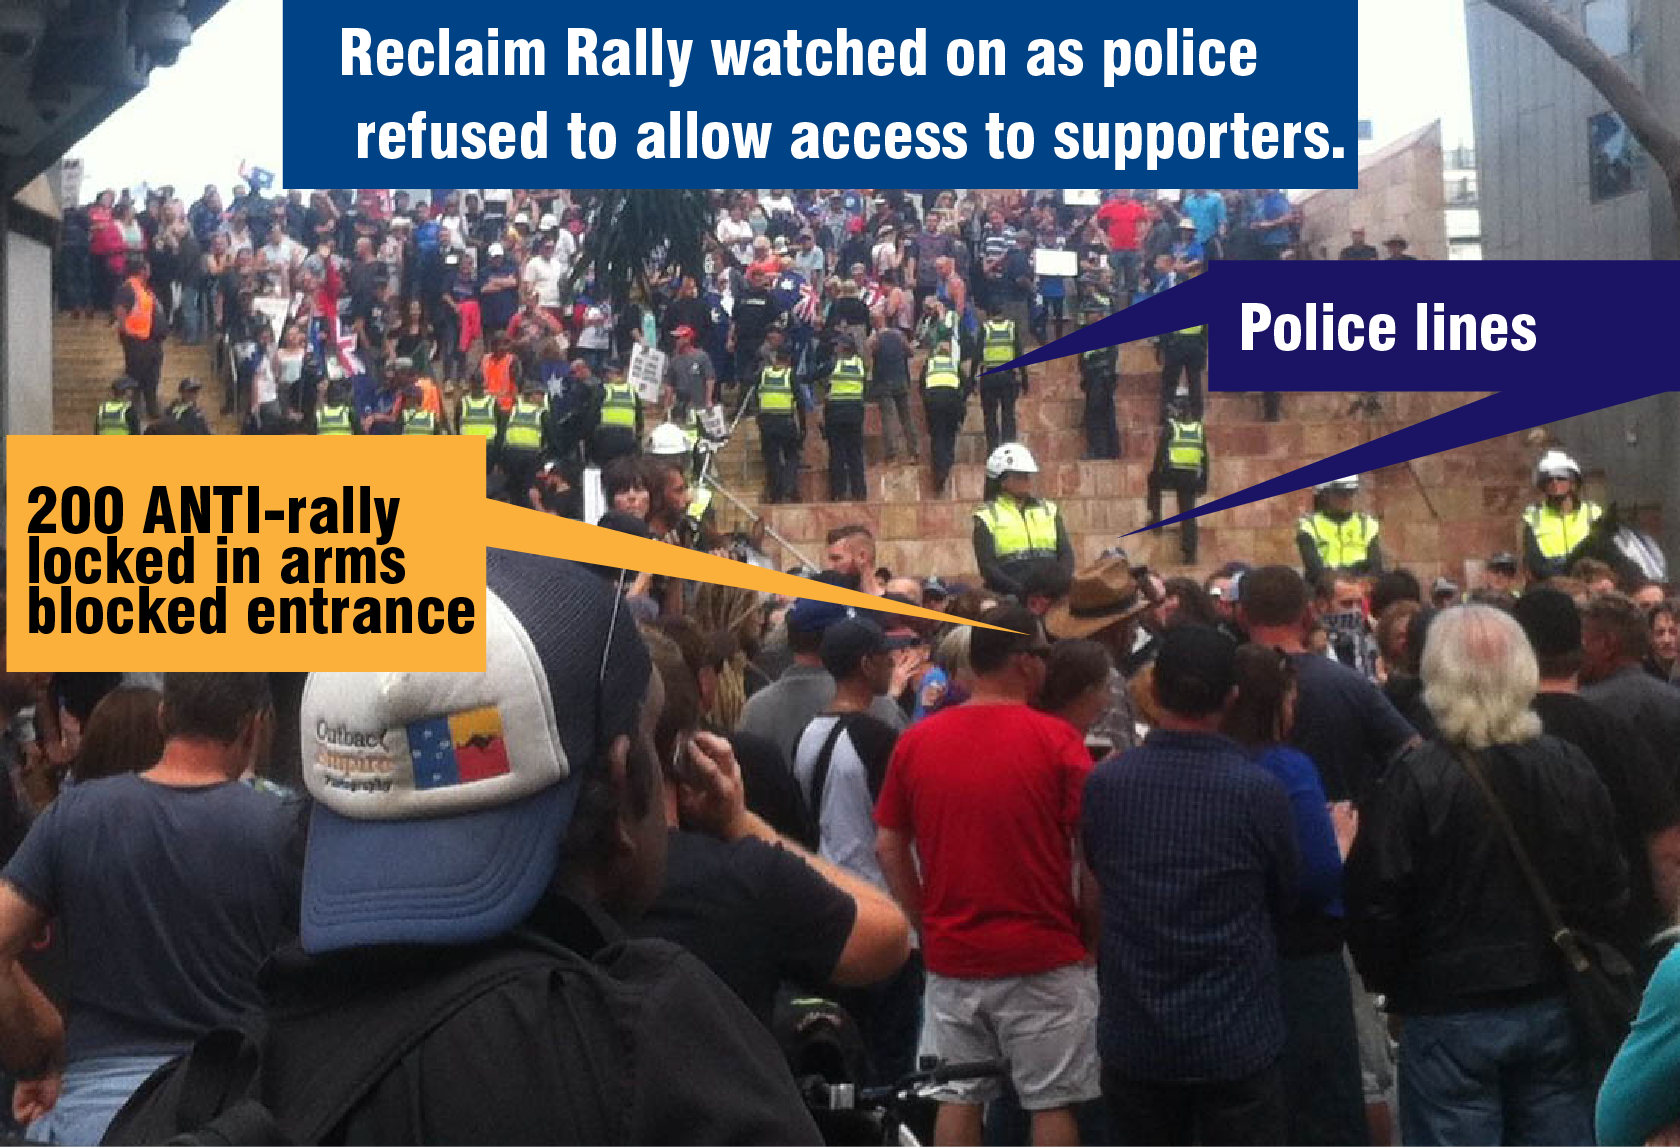 Flinders Street: This scenario made it impossible for Reclaim Rally goers to join their rally at the top of these stairs.